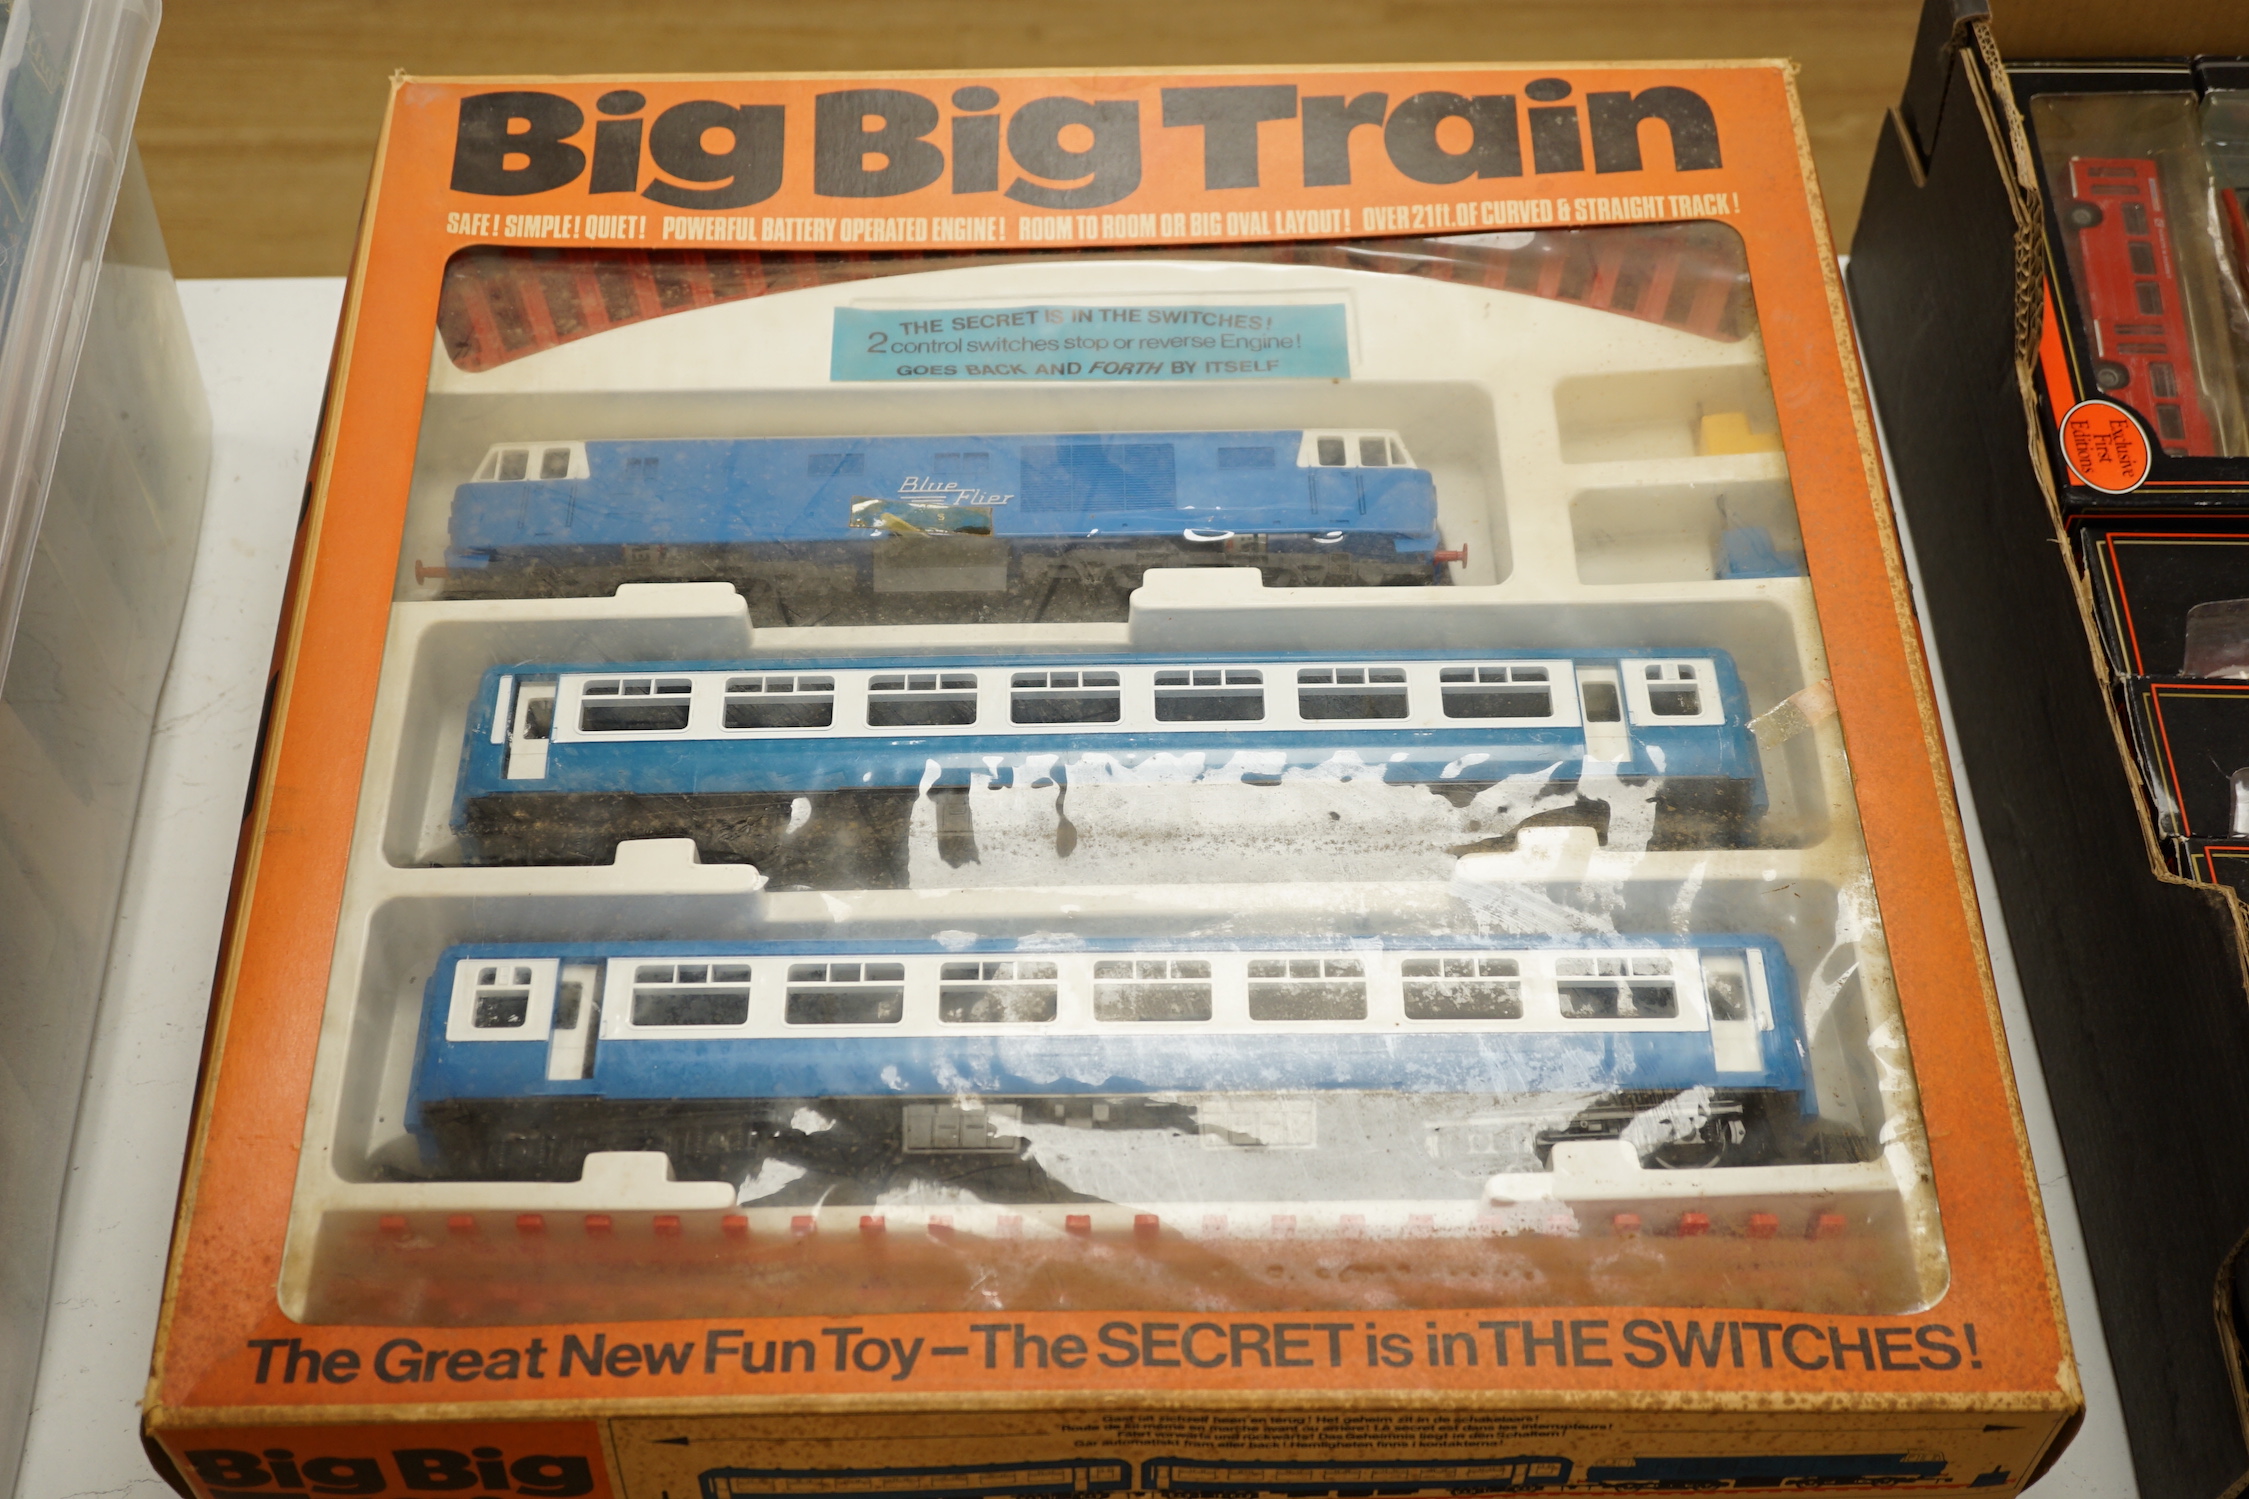 Three Tri-ang The Big Big Train 0 gauge train sets, all with a ‘Blue Flyer’ diesel locomotive and rolling stock, track sections, etc.